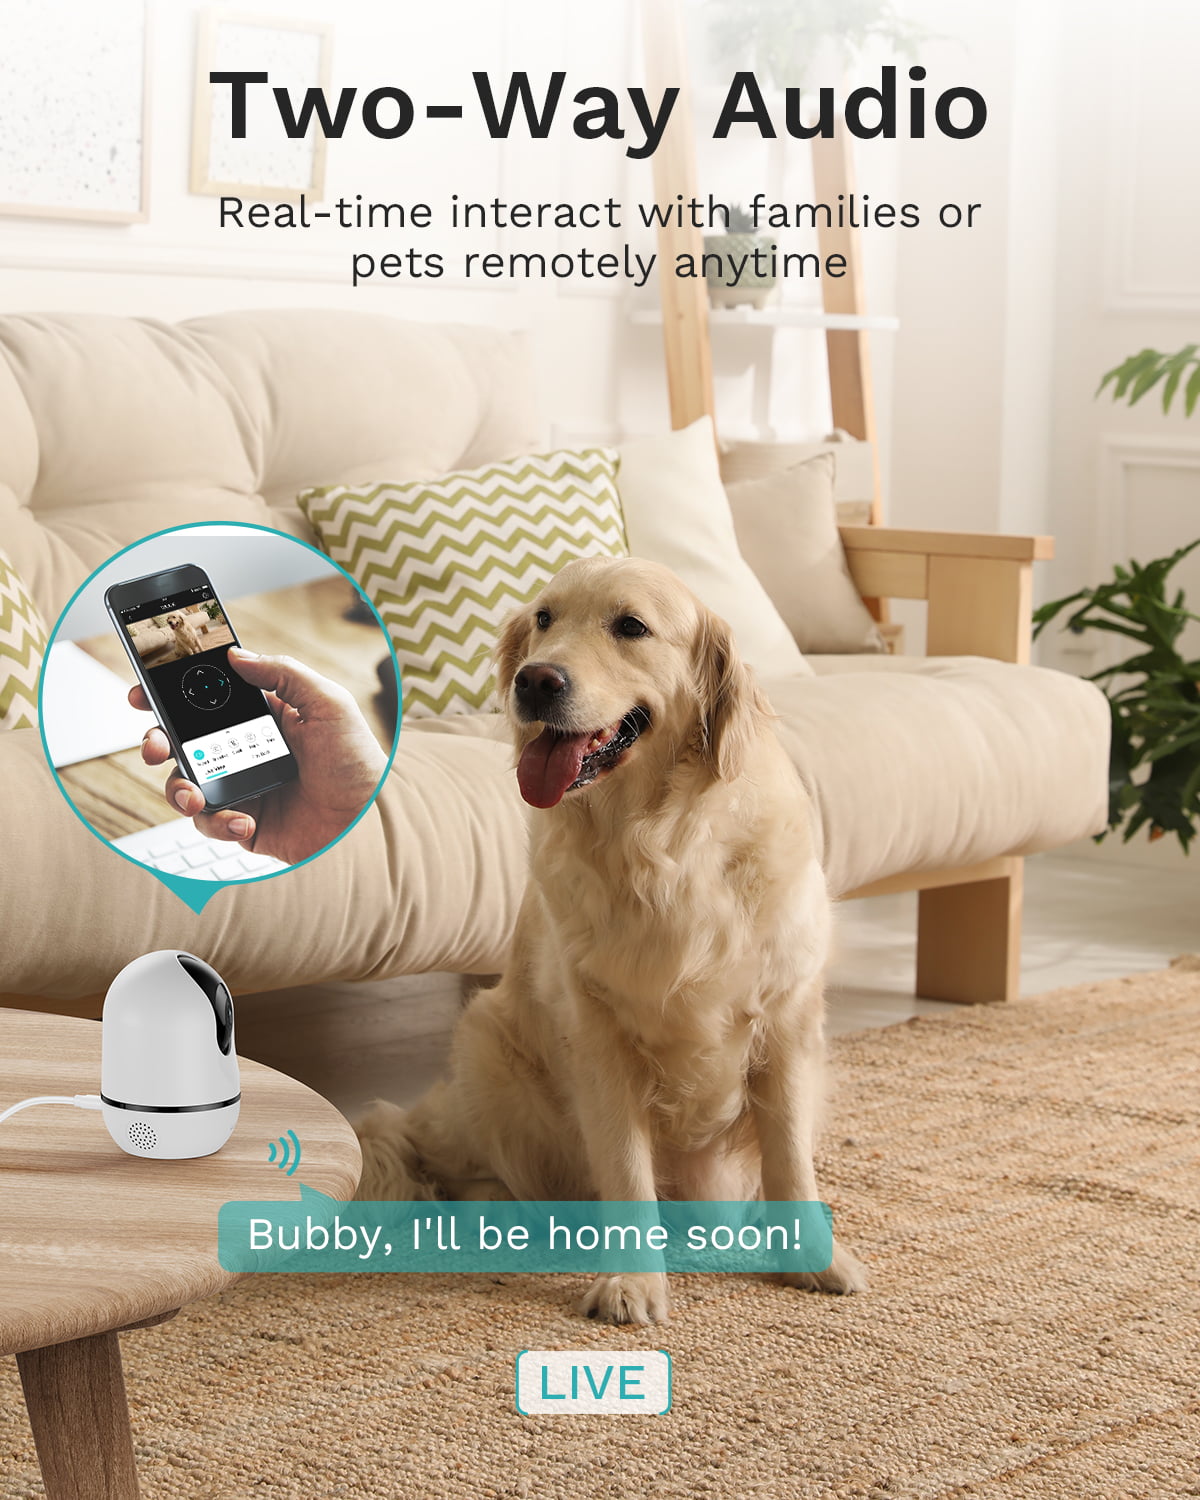 WUUK 4MP Indoor Pan/Tilt Security Camera, Baby Monitor with Camera and Audio, Wi-Fi Pet Camera with Phone APP, Motion Detection & Tracking, Night Vision, 2-Way Audio, Compatible with Alexa & Google